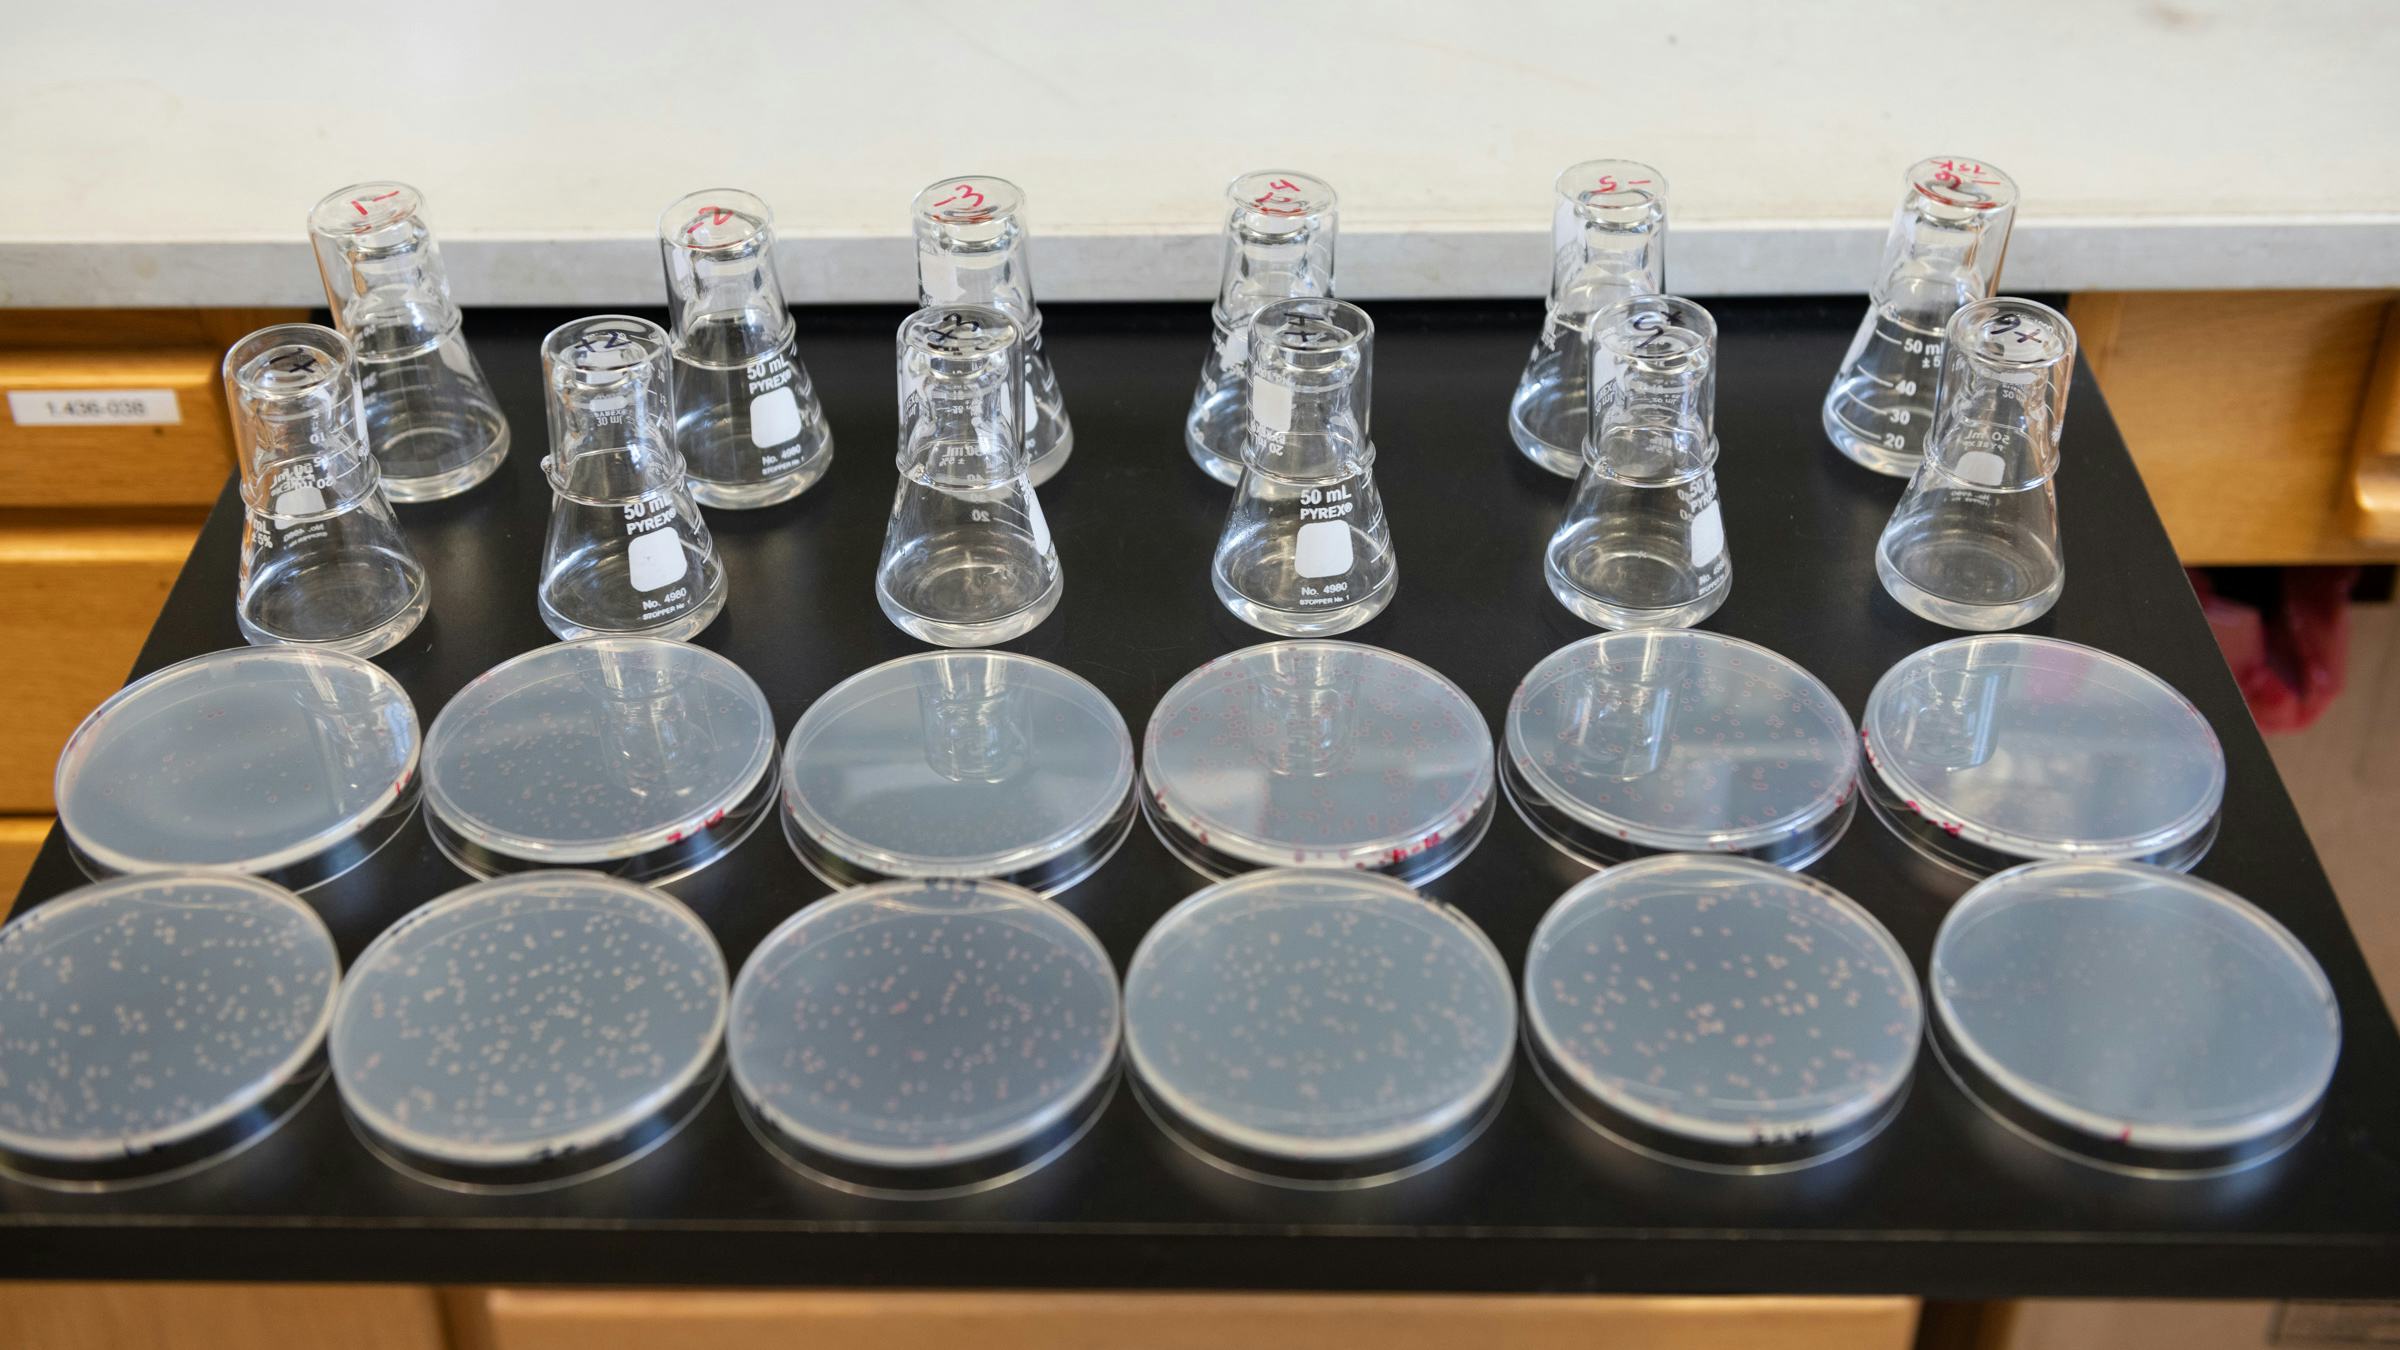 12 flasks and 12 petri dishes contain the latest generations of bacteria in the Long-Term Evolution Experiment